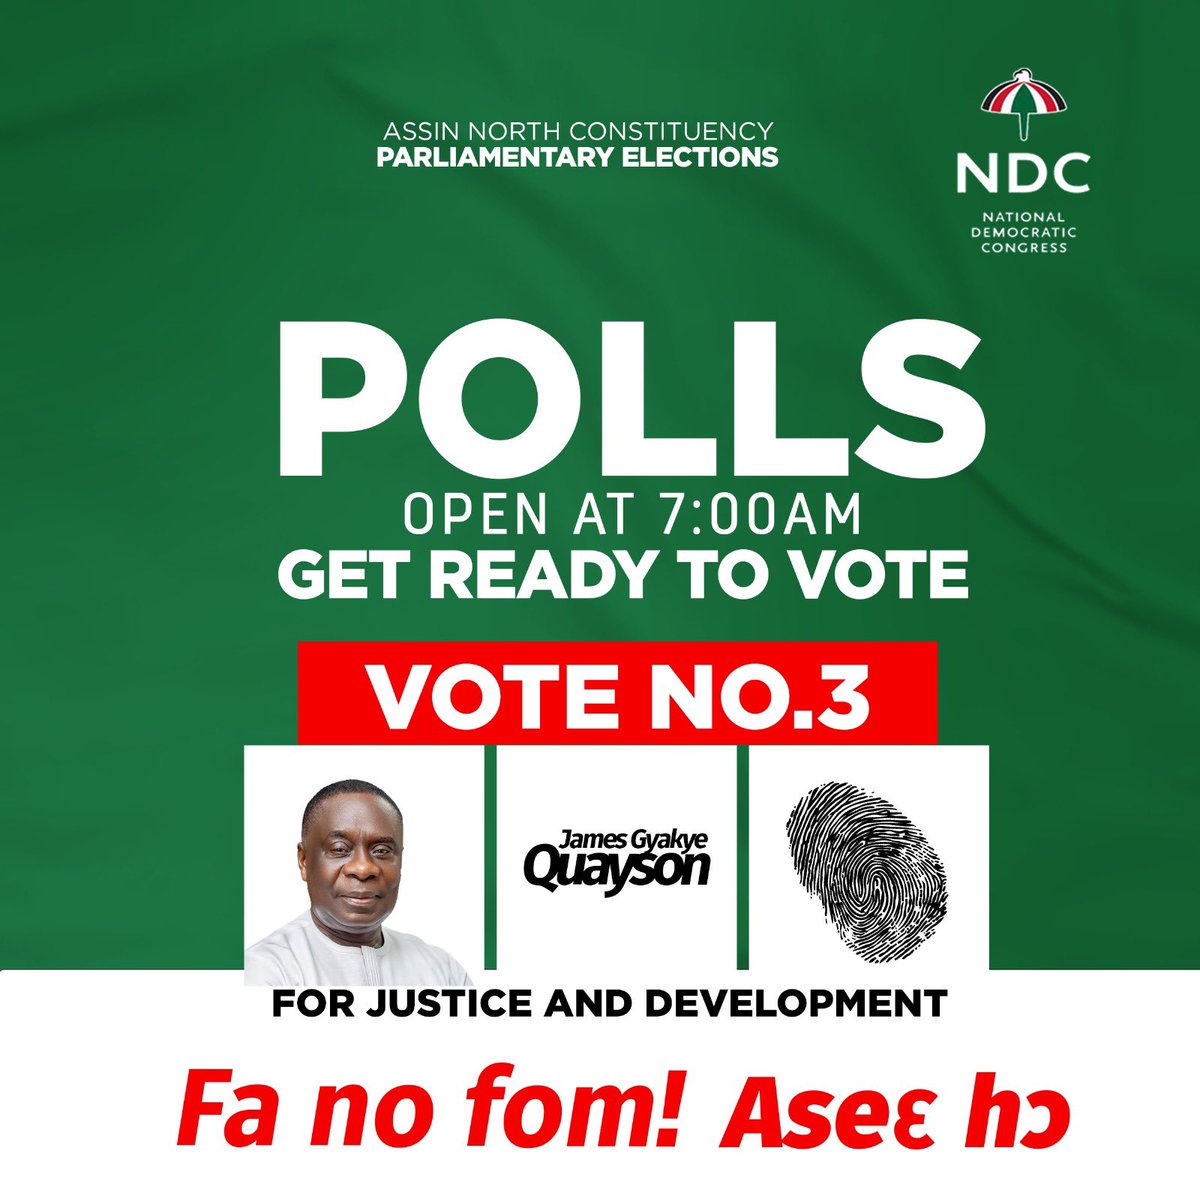 Assin North, please come out and vote. A victory for Hon. James Gyakye Quayson is a victory for justice! Obiara ka ho!!!! 

#AssinNorth #Victory #NDC